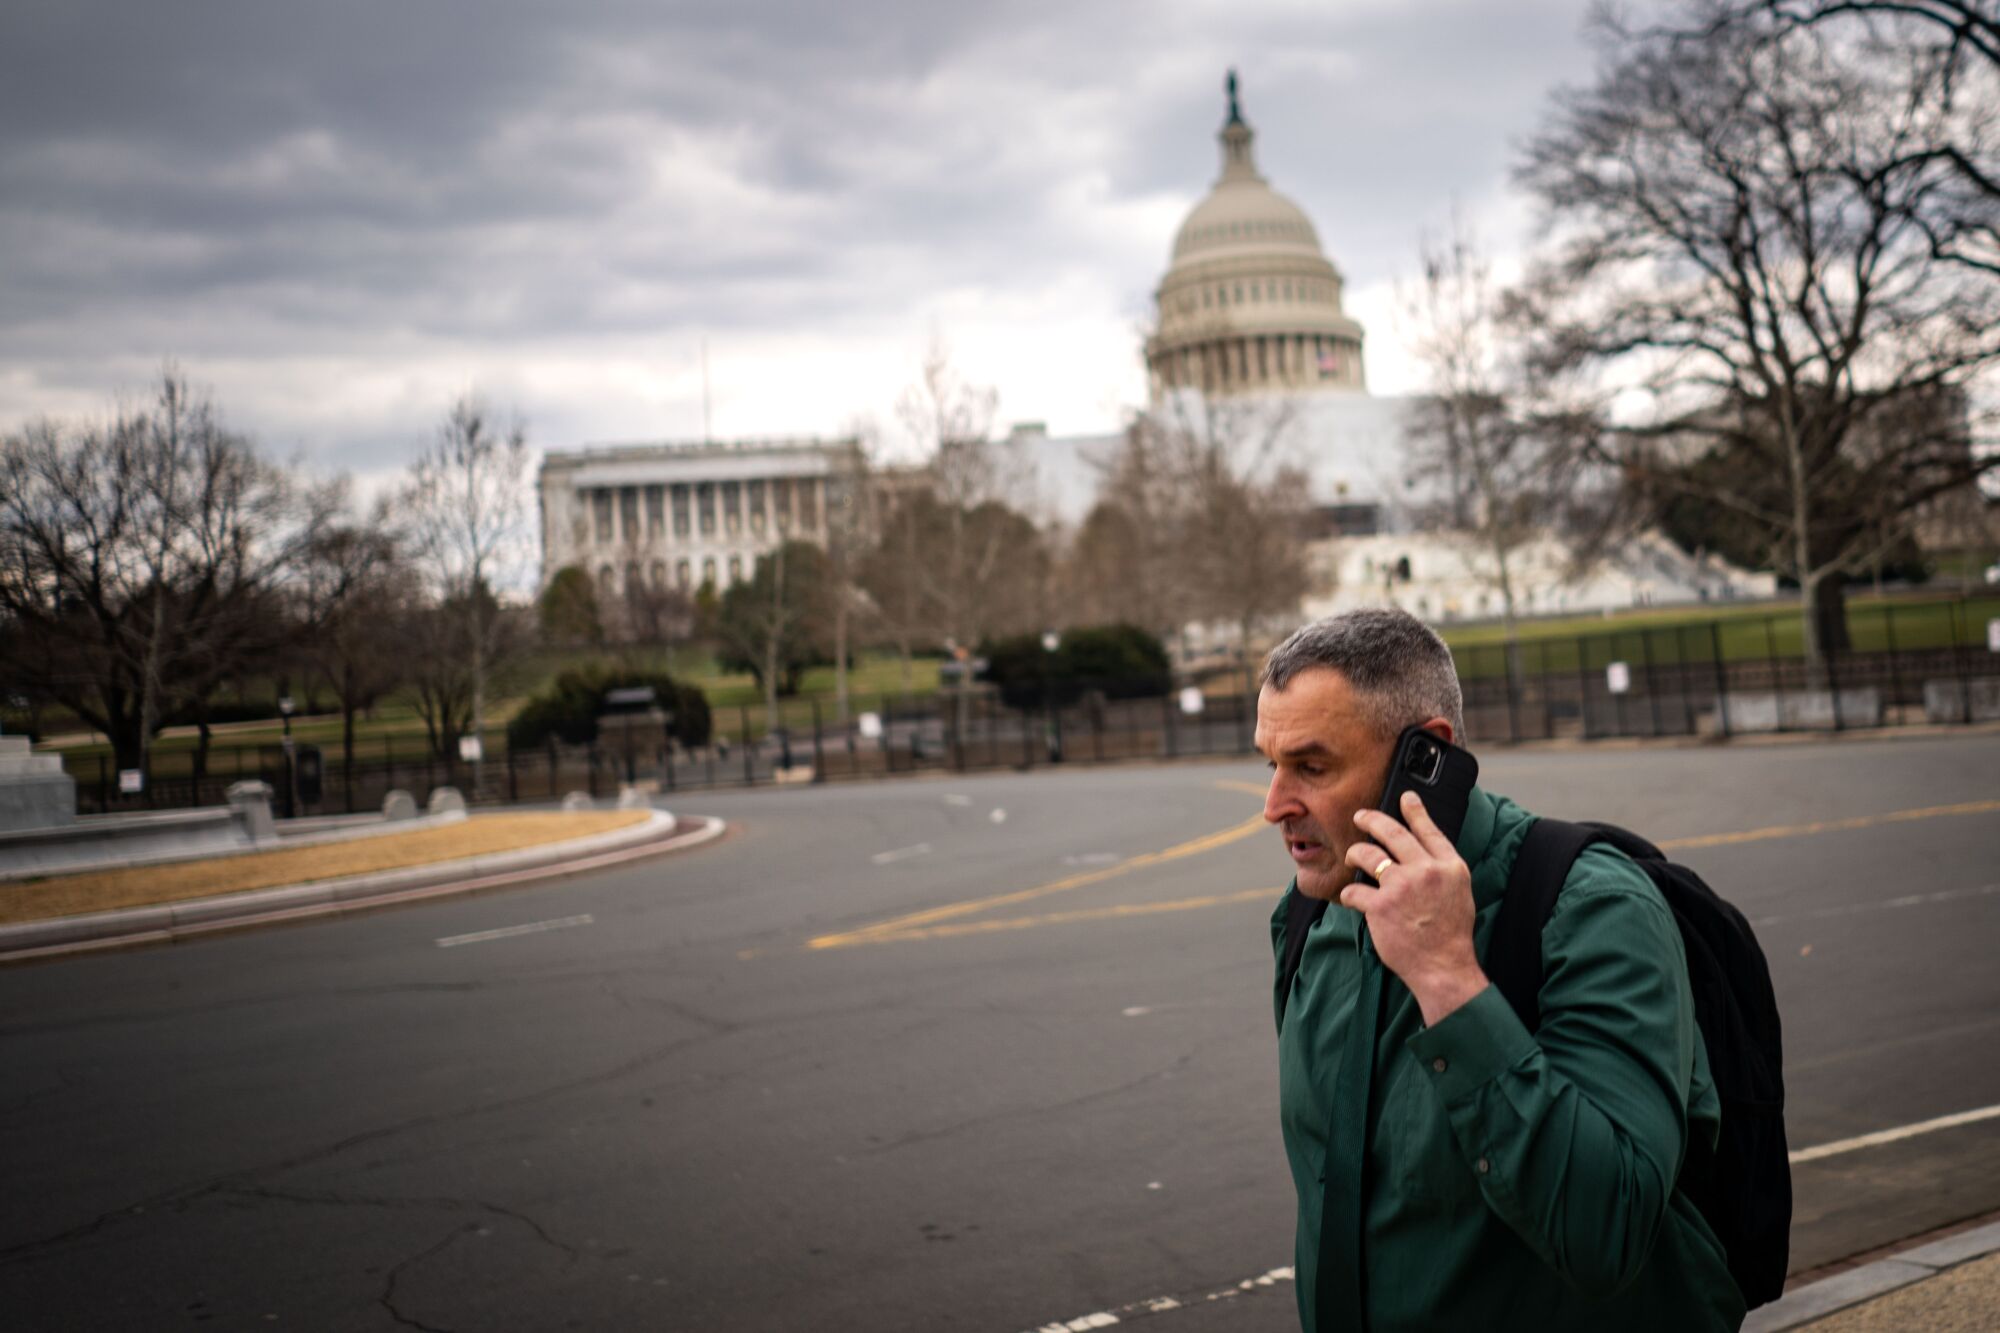 A man holds a cellphone to his ear as he walks along a sidewalk with the U.S. Capitol visible in the background.